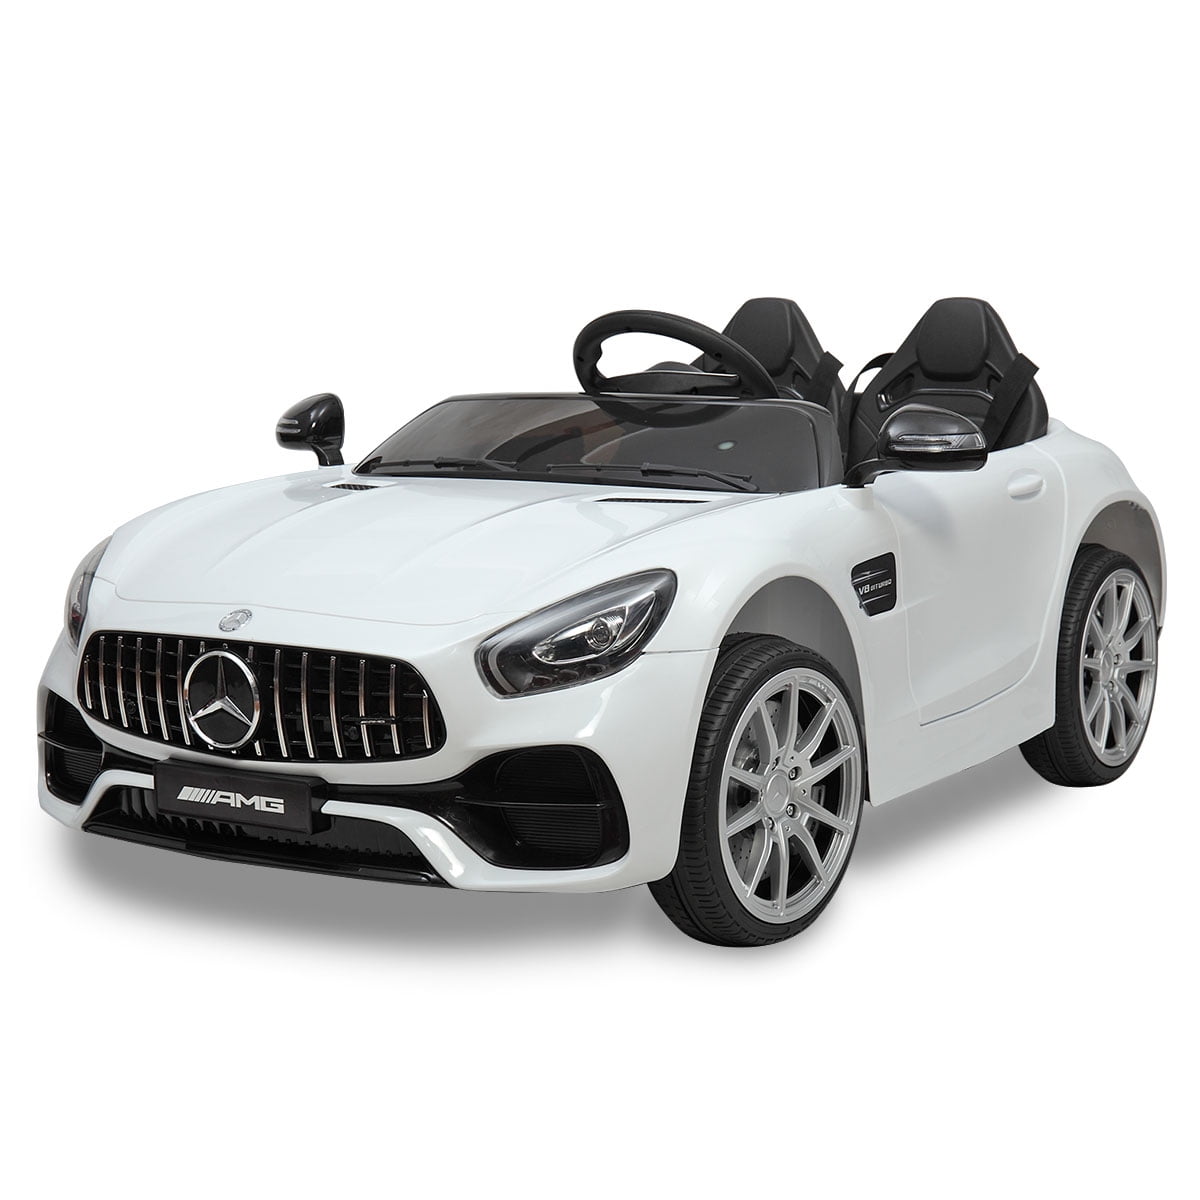 Details about   Mercedes Benz Kids Ride On Car Children Gift Toys Electric & Remote Control MP3 